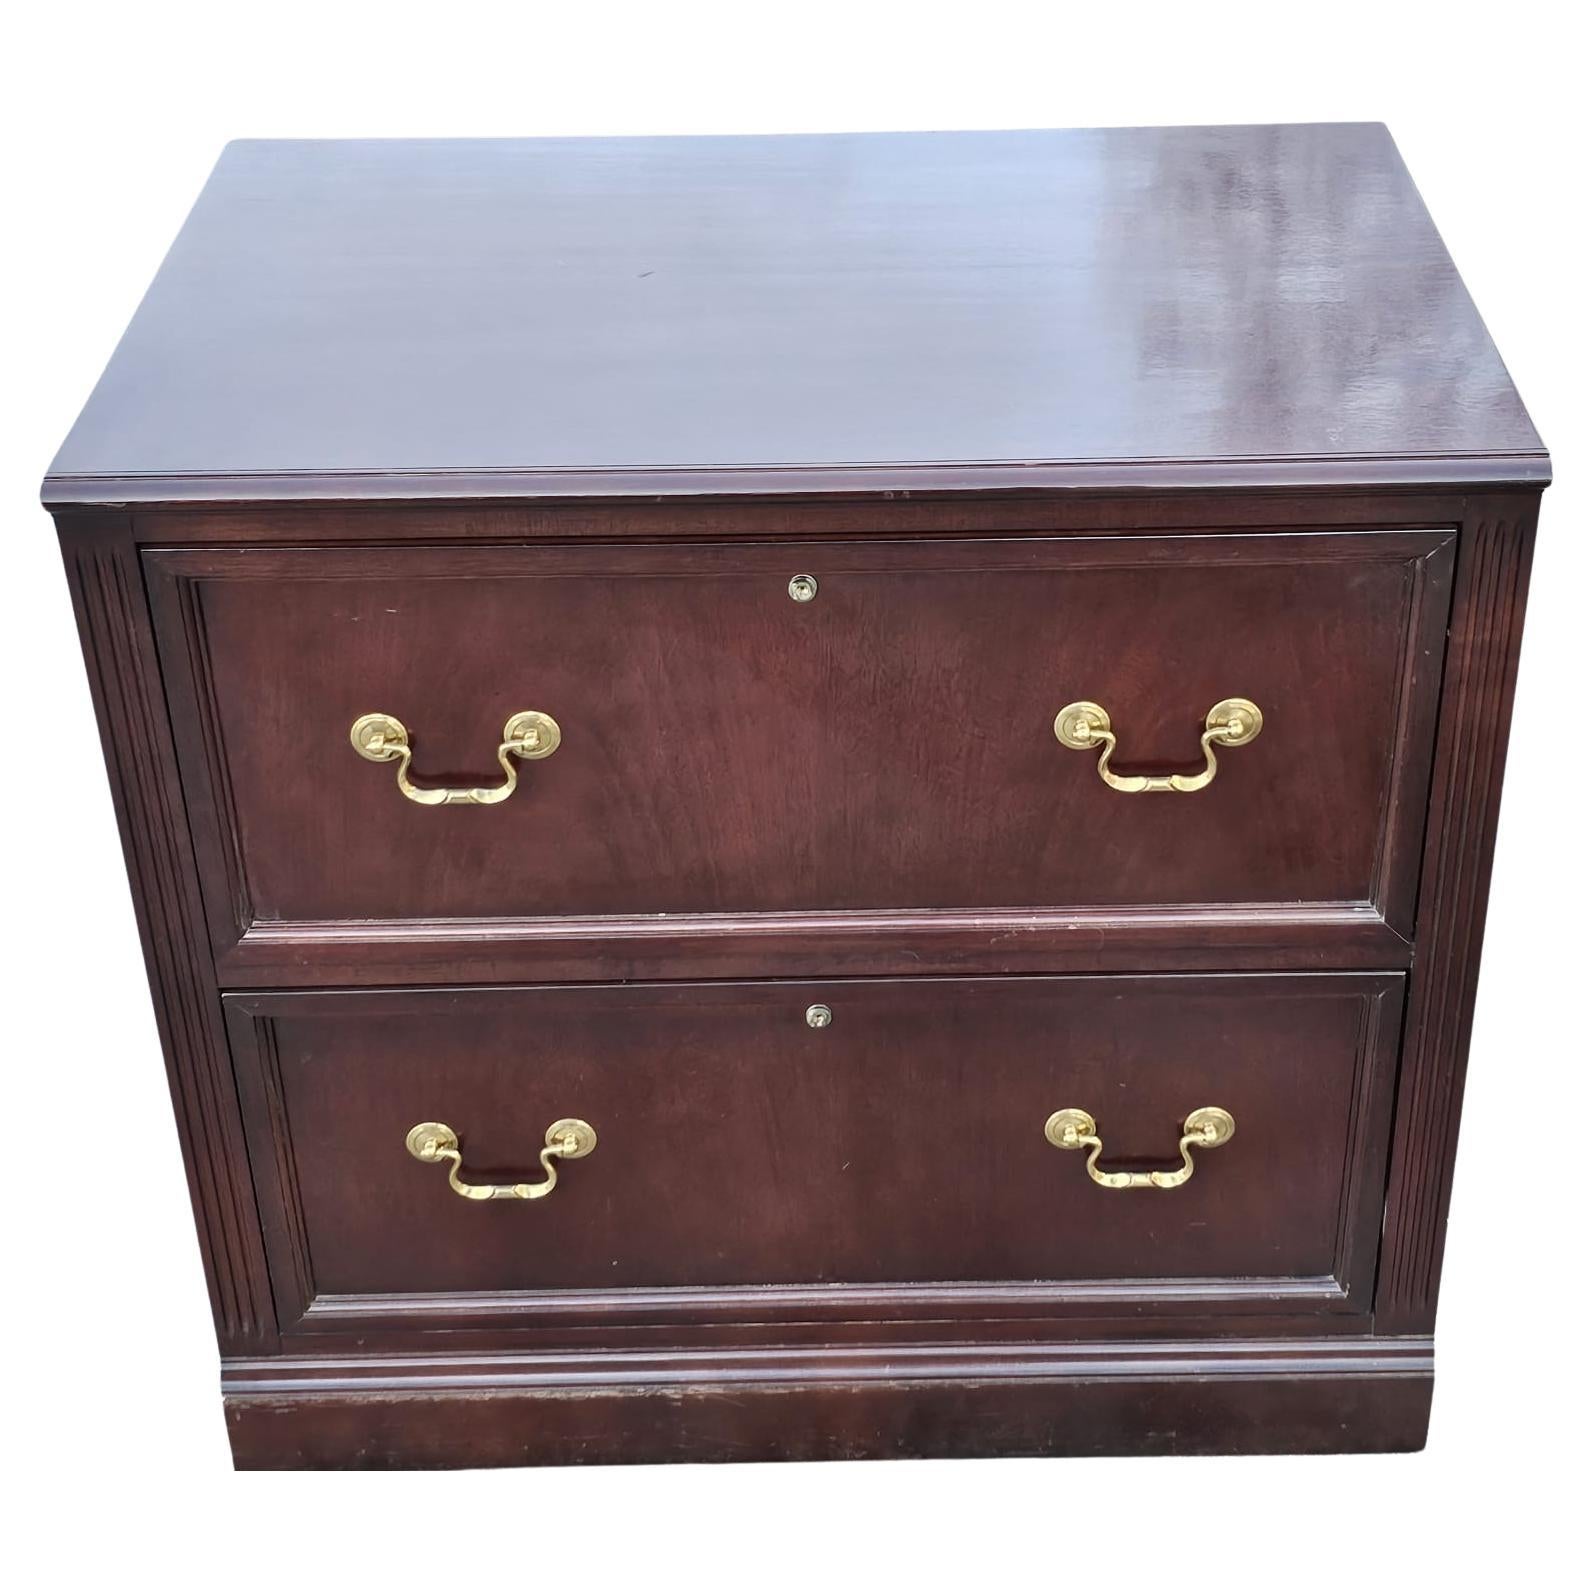 A two drawer lateral two-Drawer cherry Executive filing cabinet. Two deep drawers independently locking. Glossy varnish finish. Measures 32